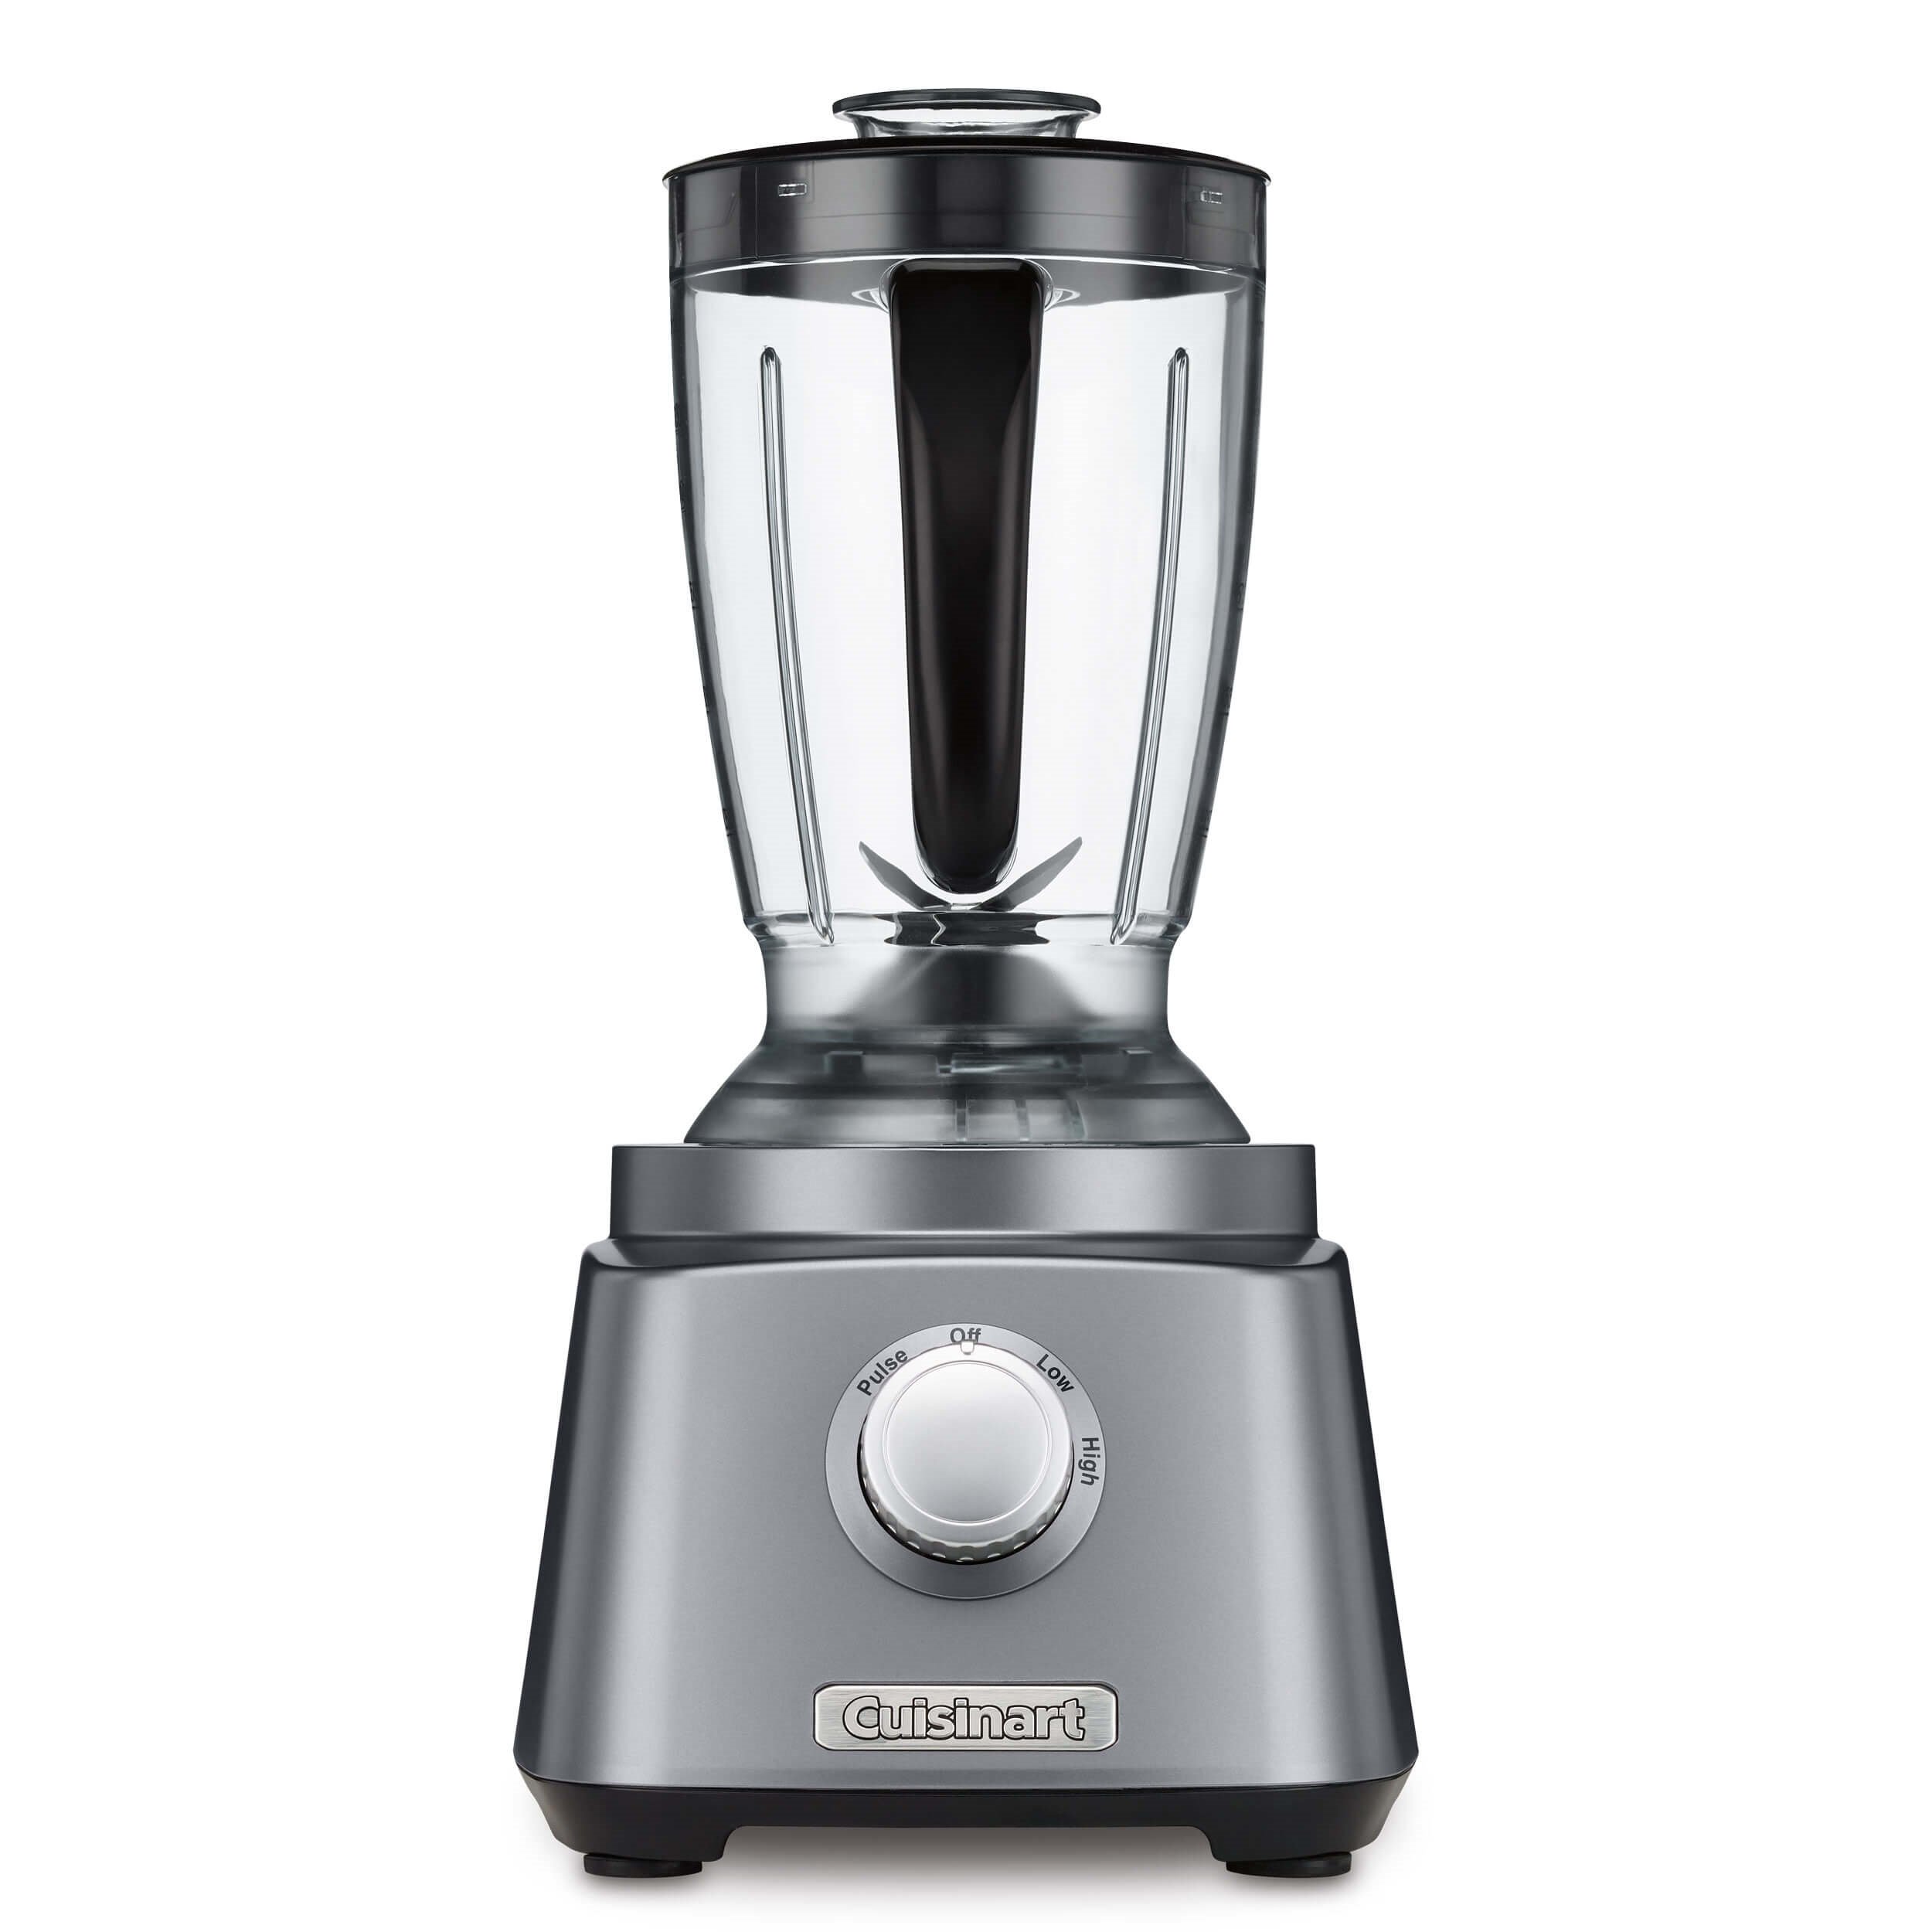 3-in-1 Blender & Food Processor Combo: Make Delicious Shakes